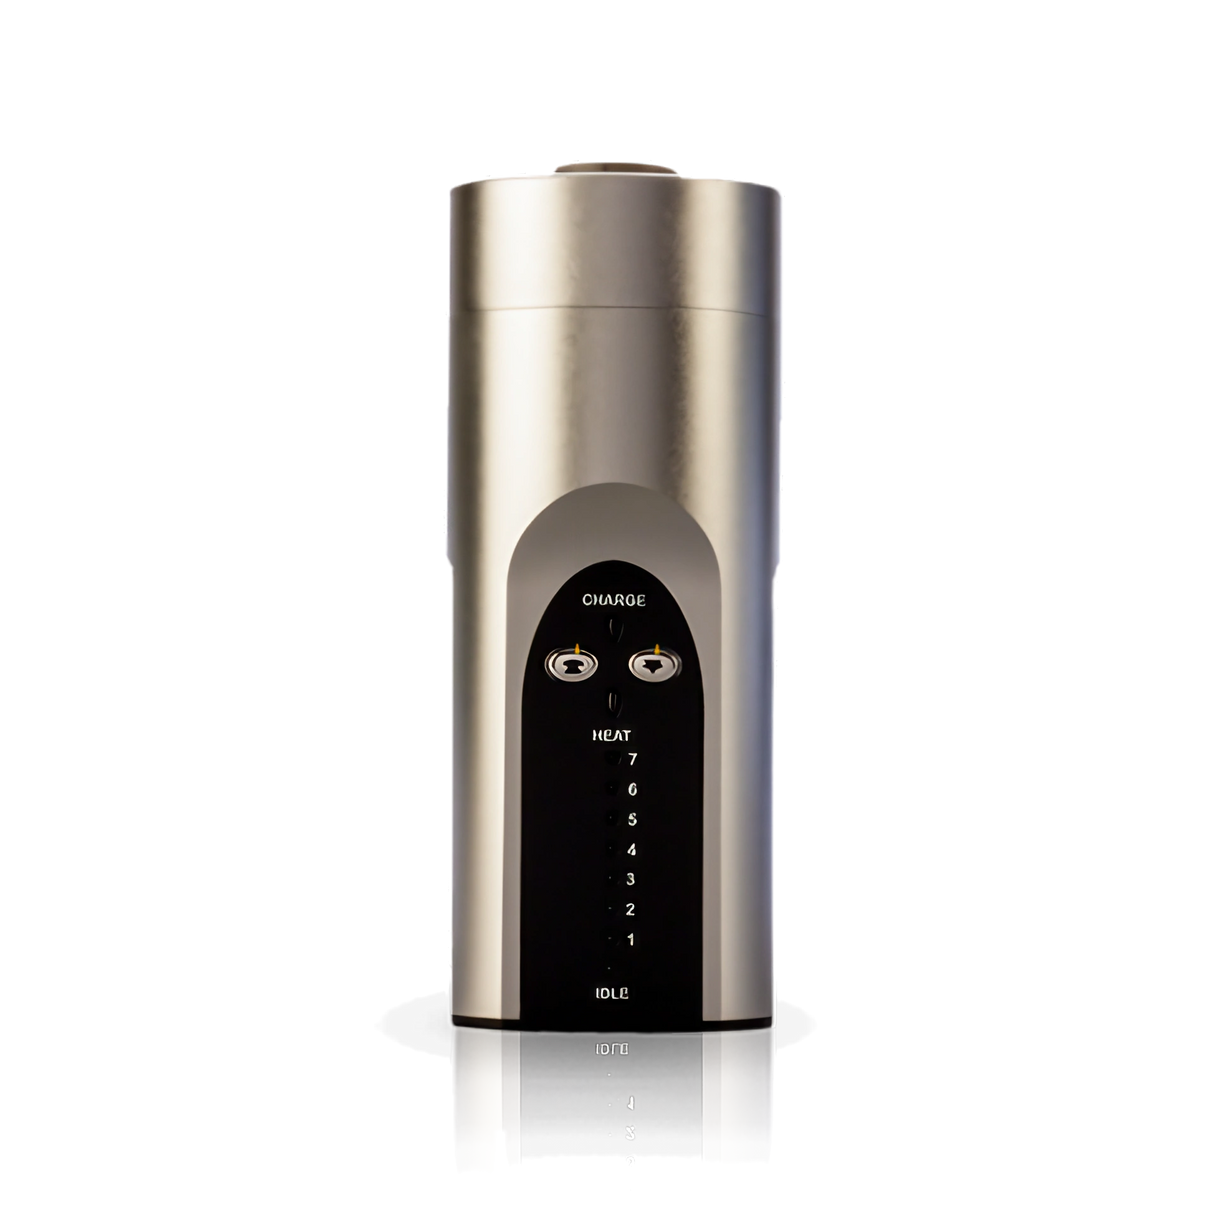 Arizer Solo Vaporizer in Silver, Portable Design for Dry Herbs, Front View on White Background